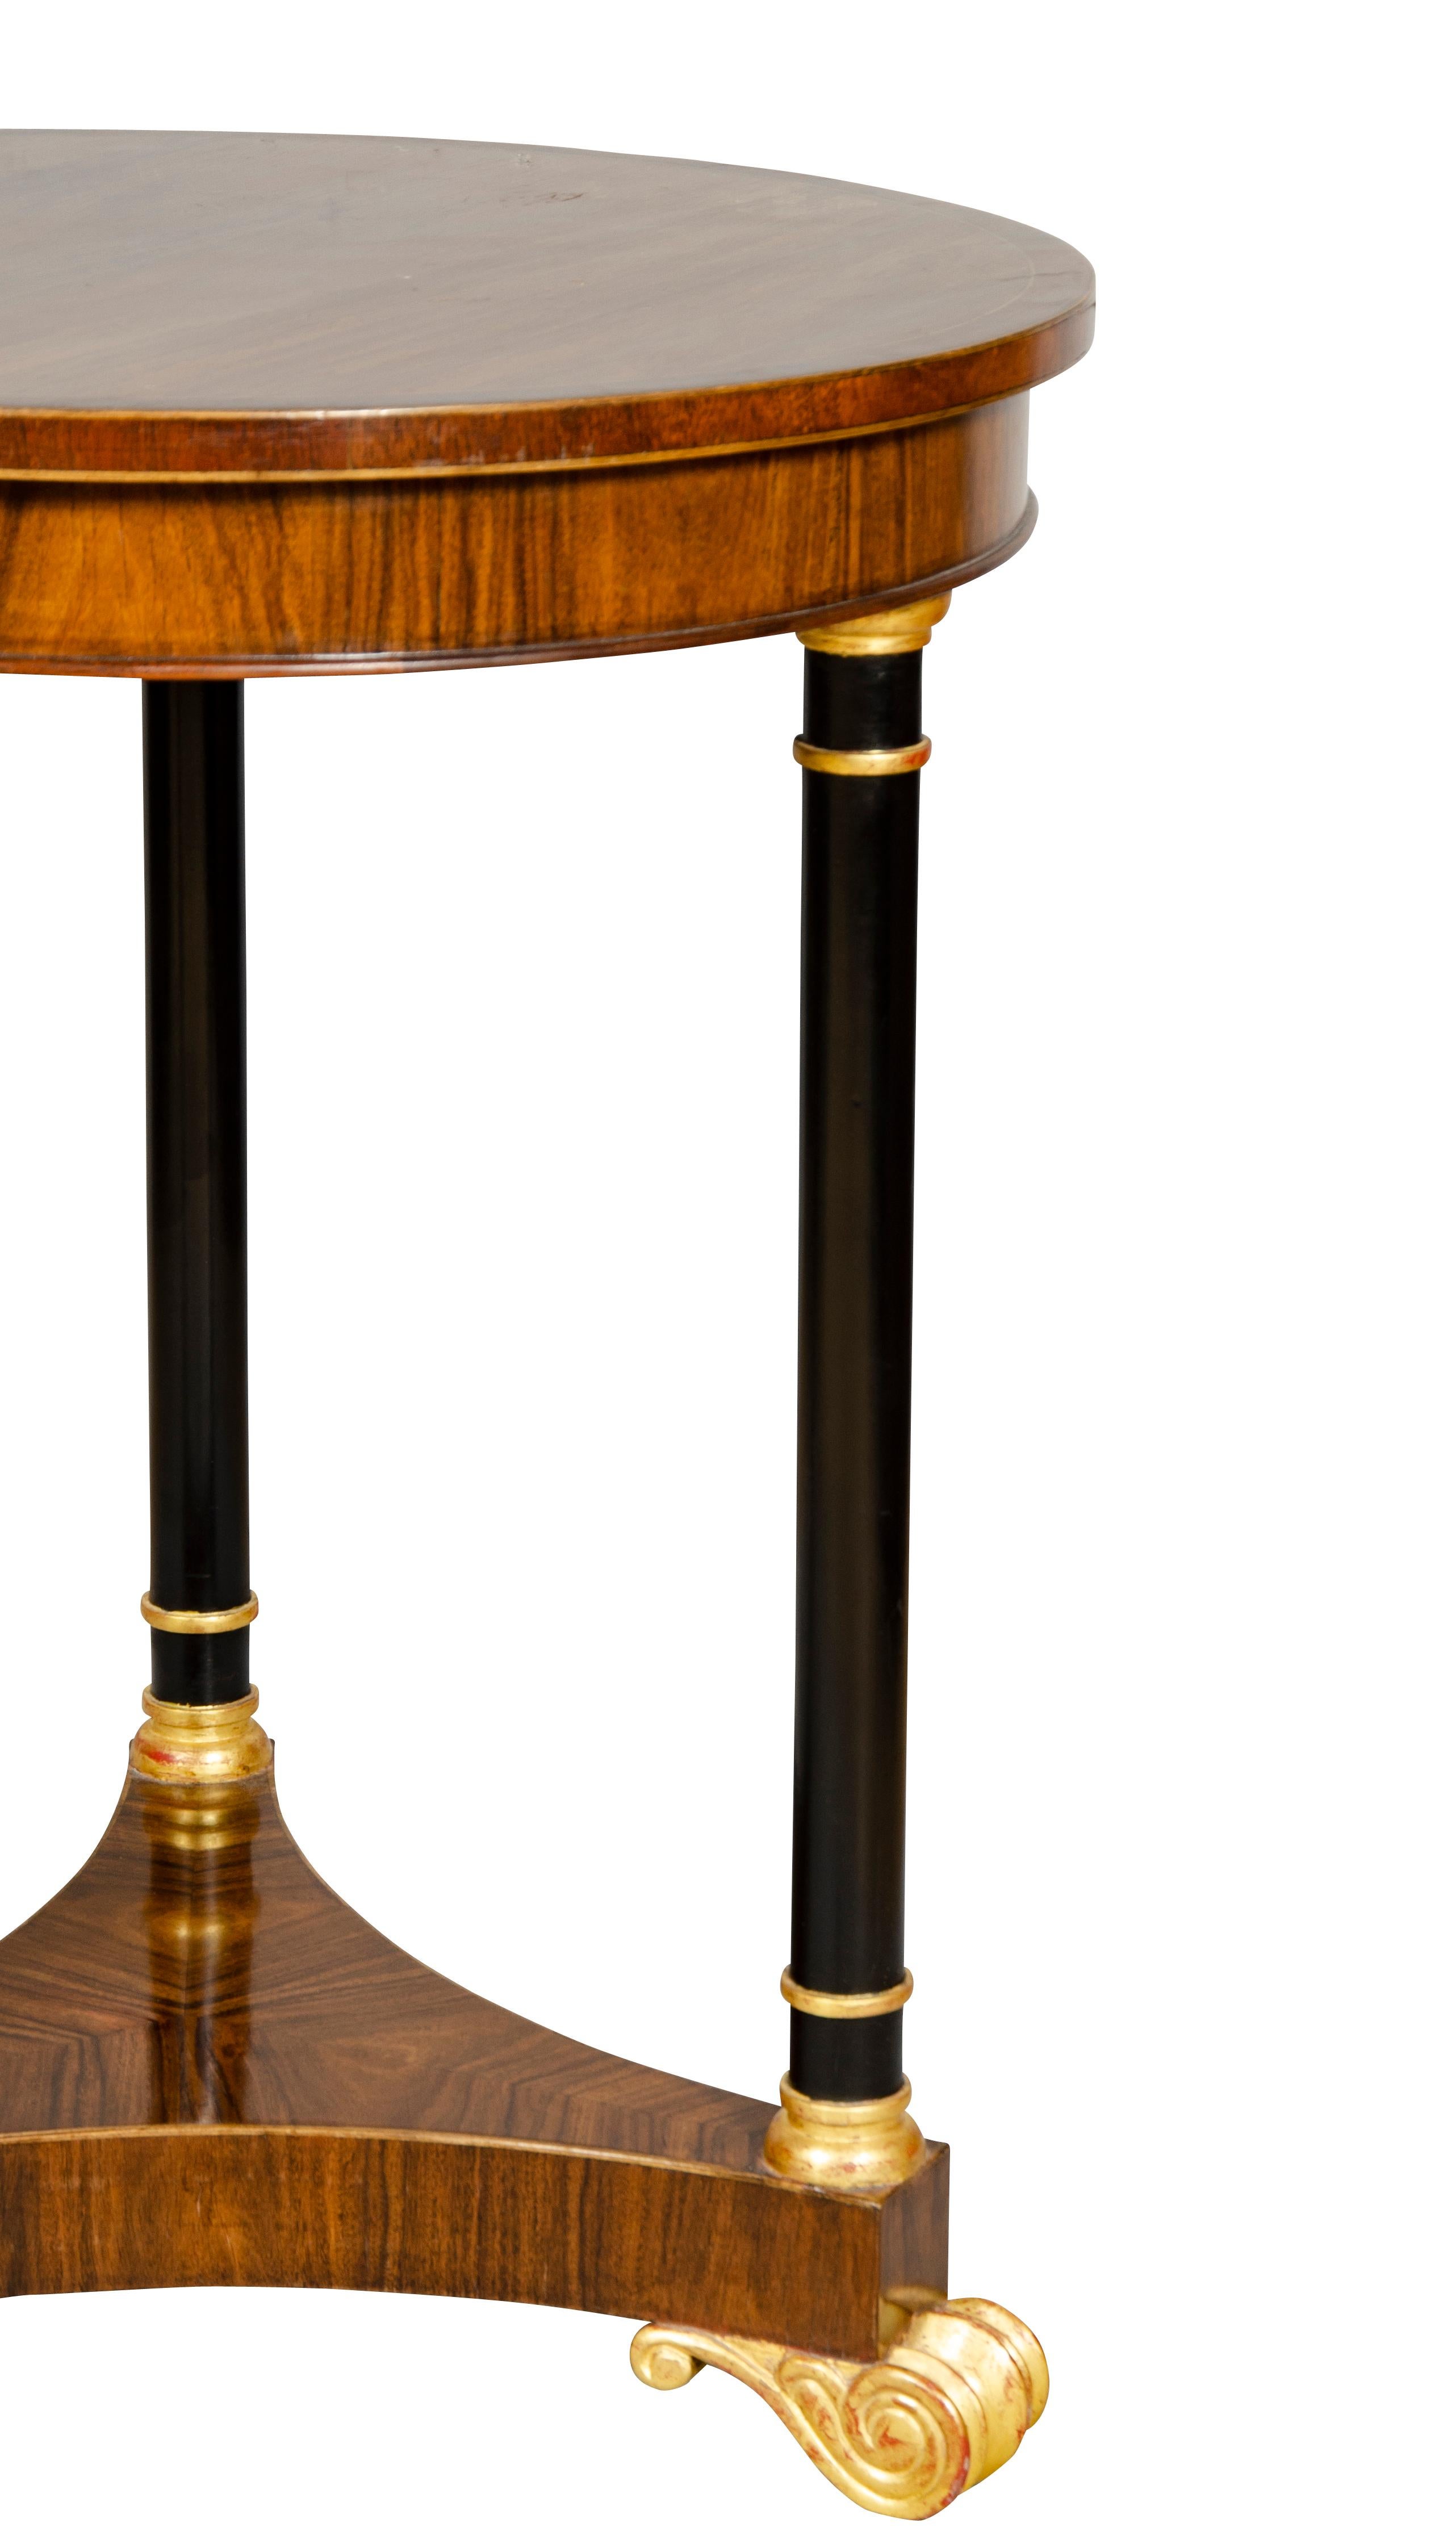 Regency Style Mahogany and Giltwood Table For Sale 5